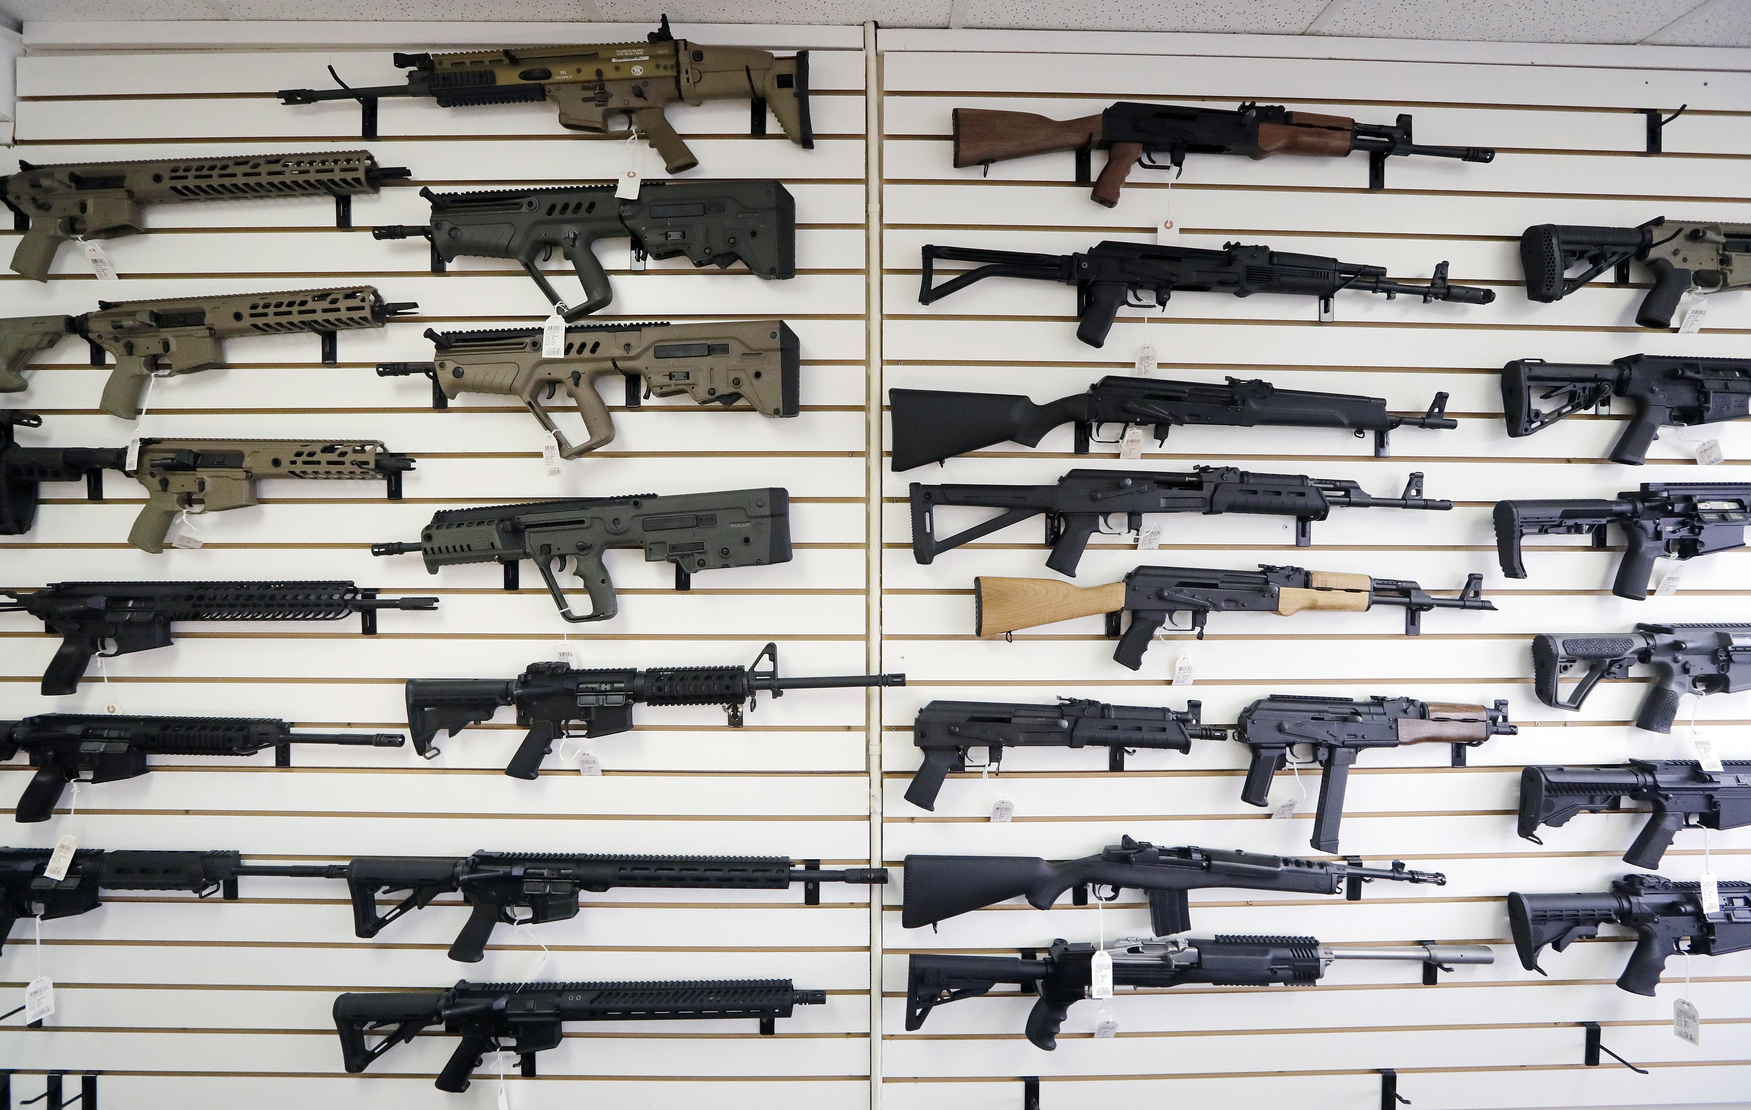 Increased criminal use of airsoft guns worries police